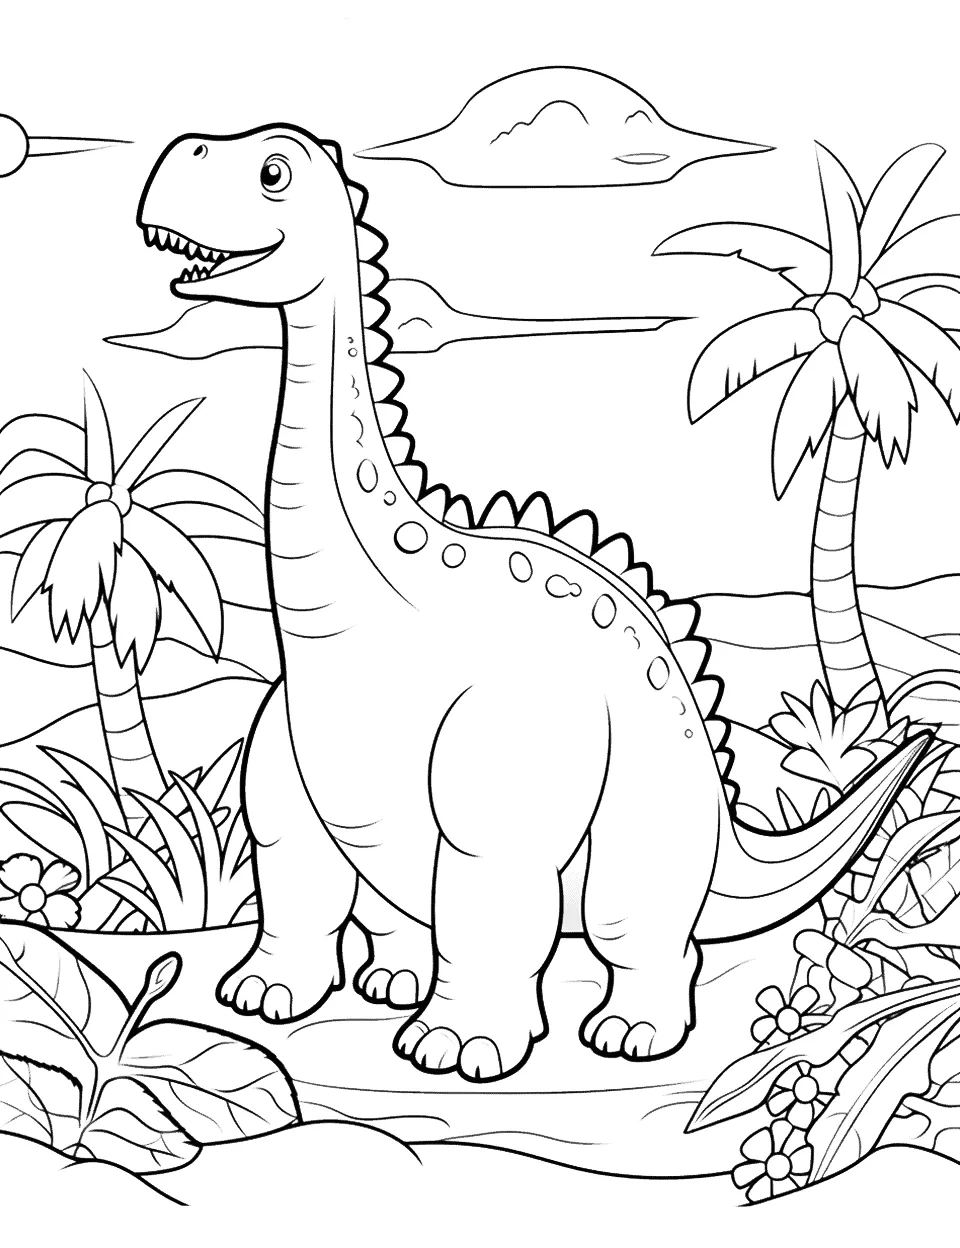 80 Printable Dinosaur Coloring Pages For Adults 21